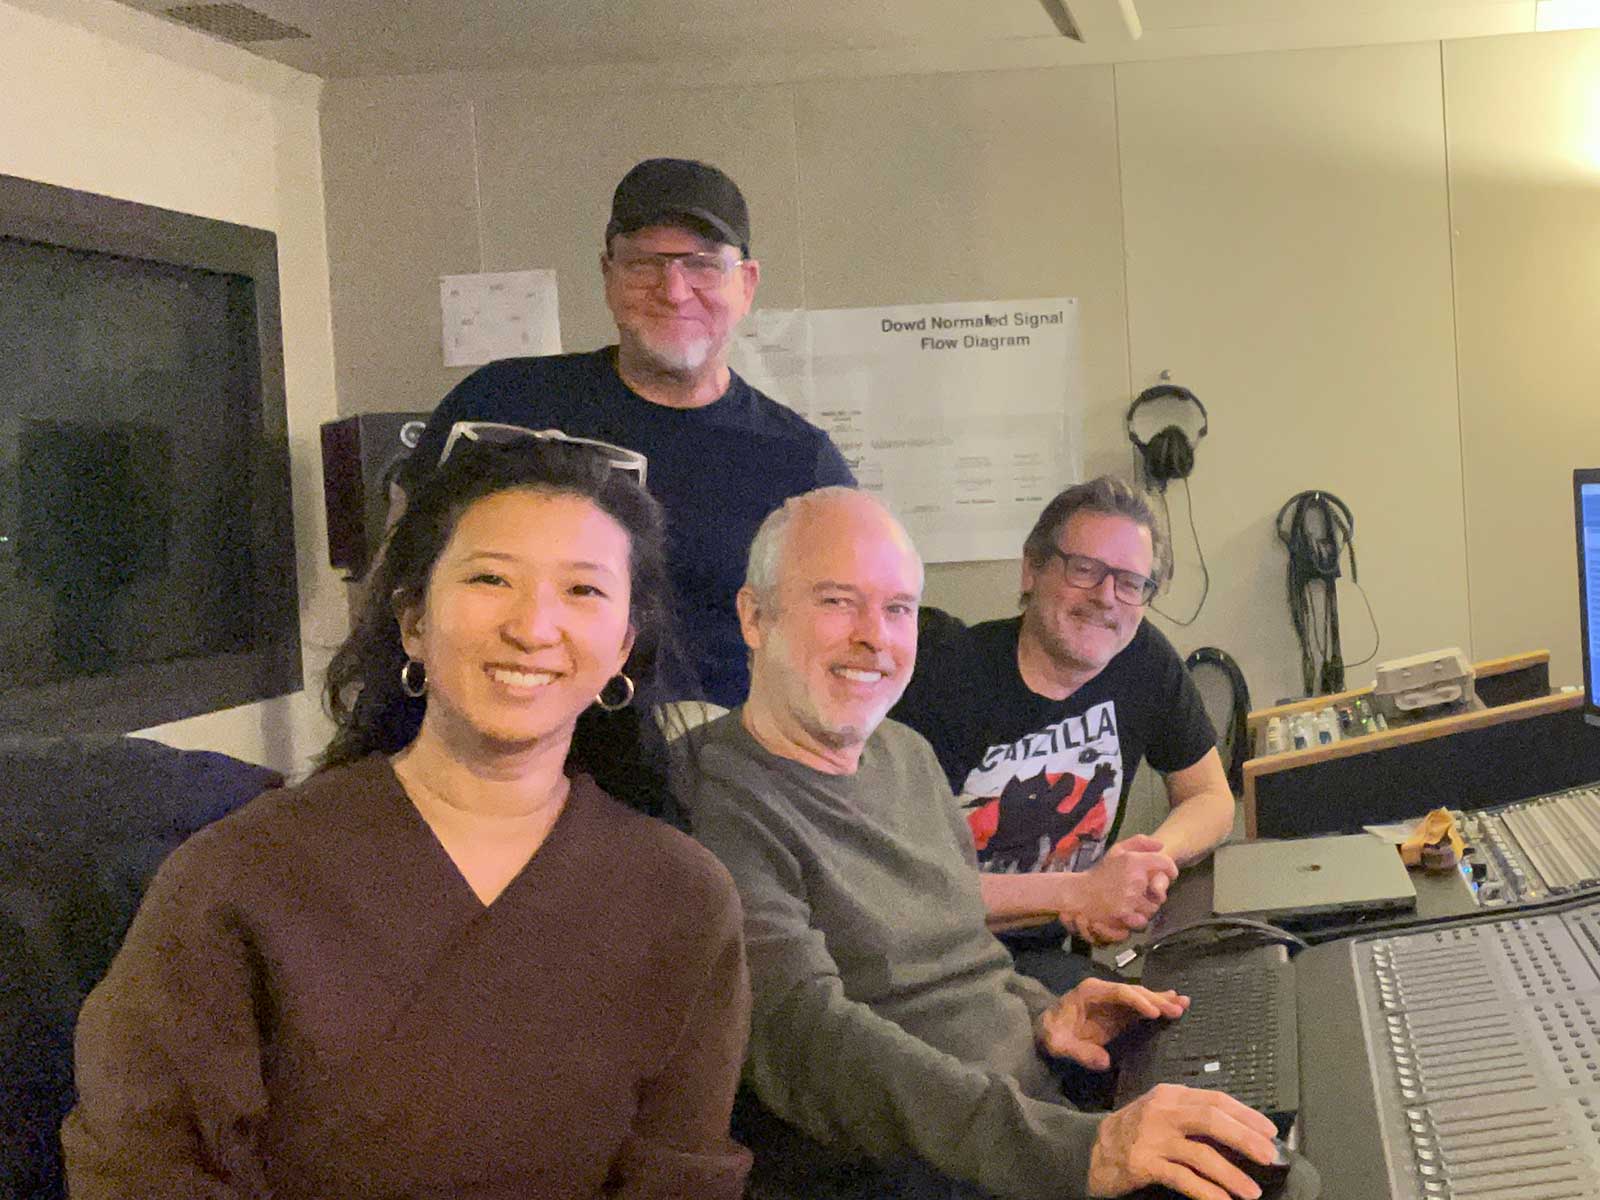 Clare Chun, Jazno Francoeur, Lawrence Schwedler, and Chris Mosio smile at camera while working in a sound production room.